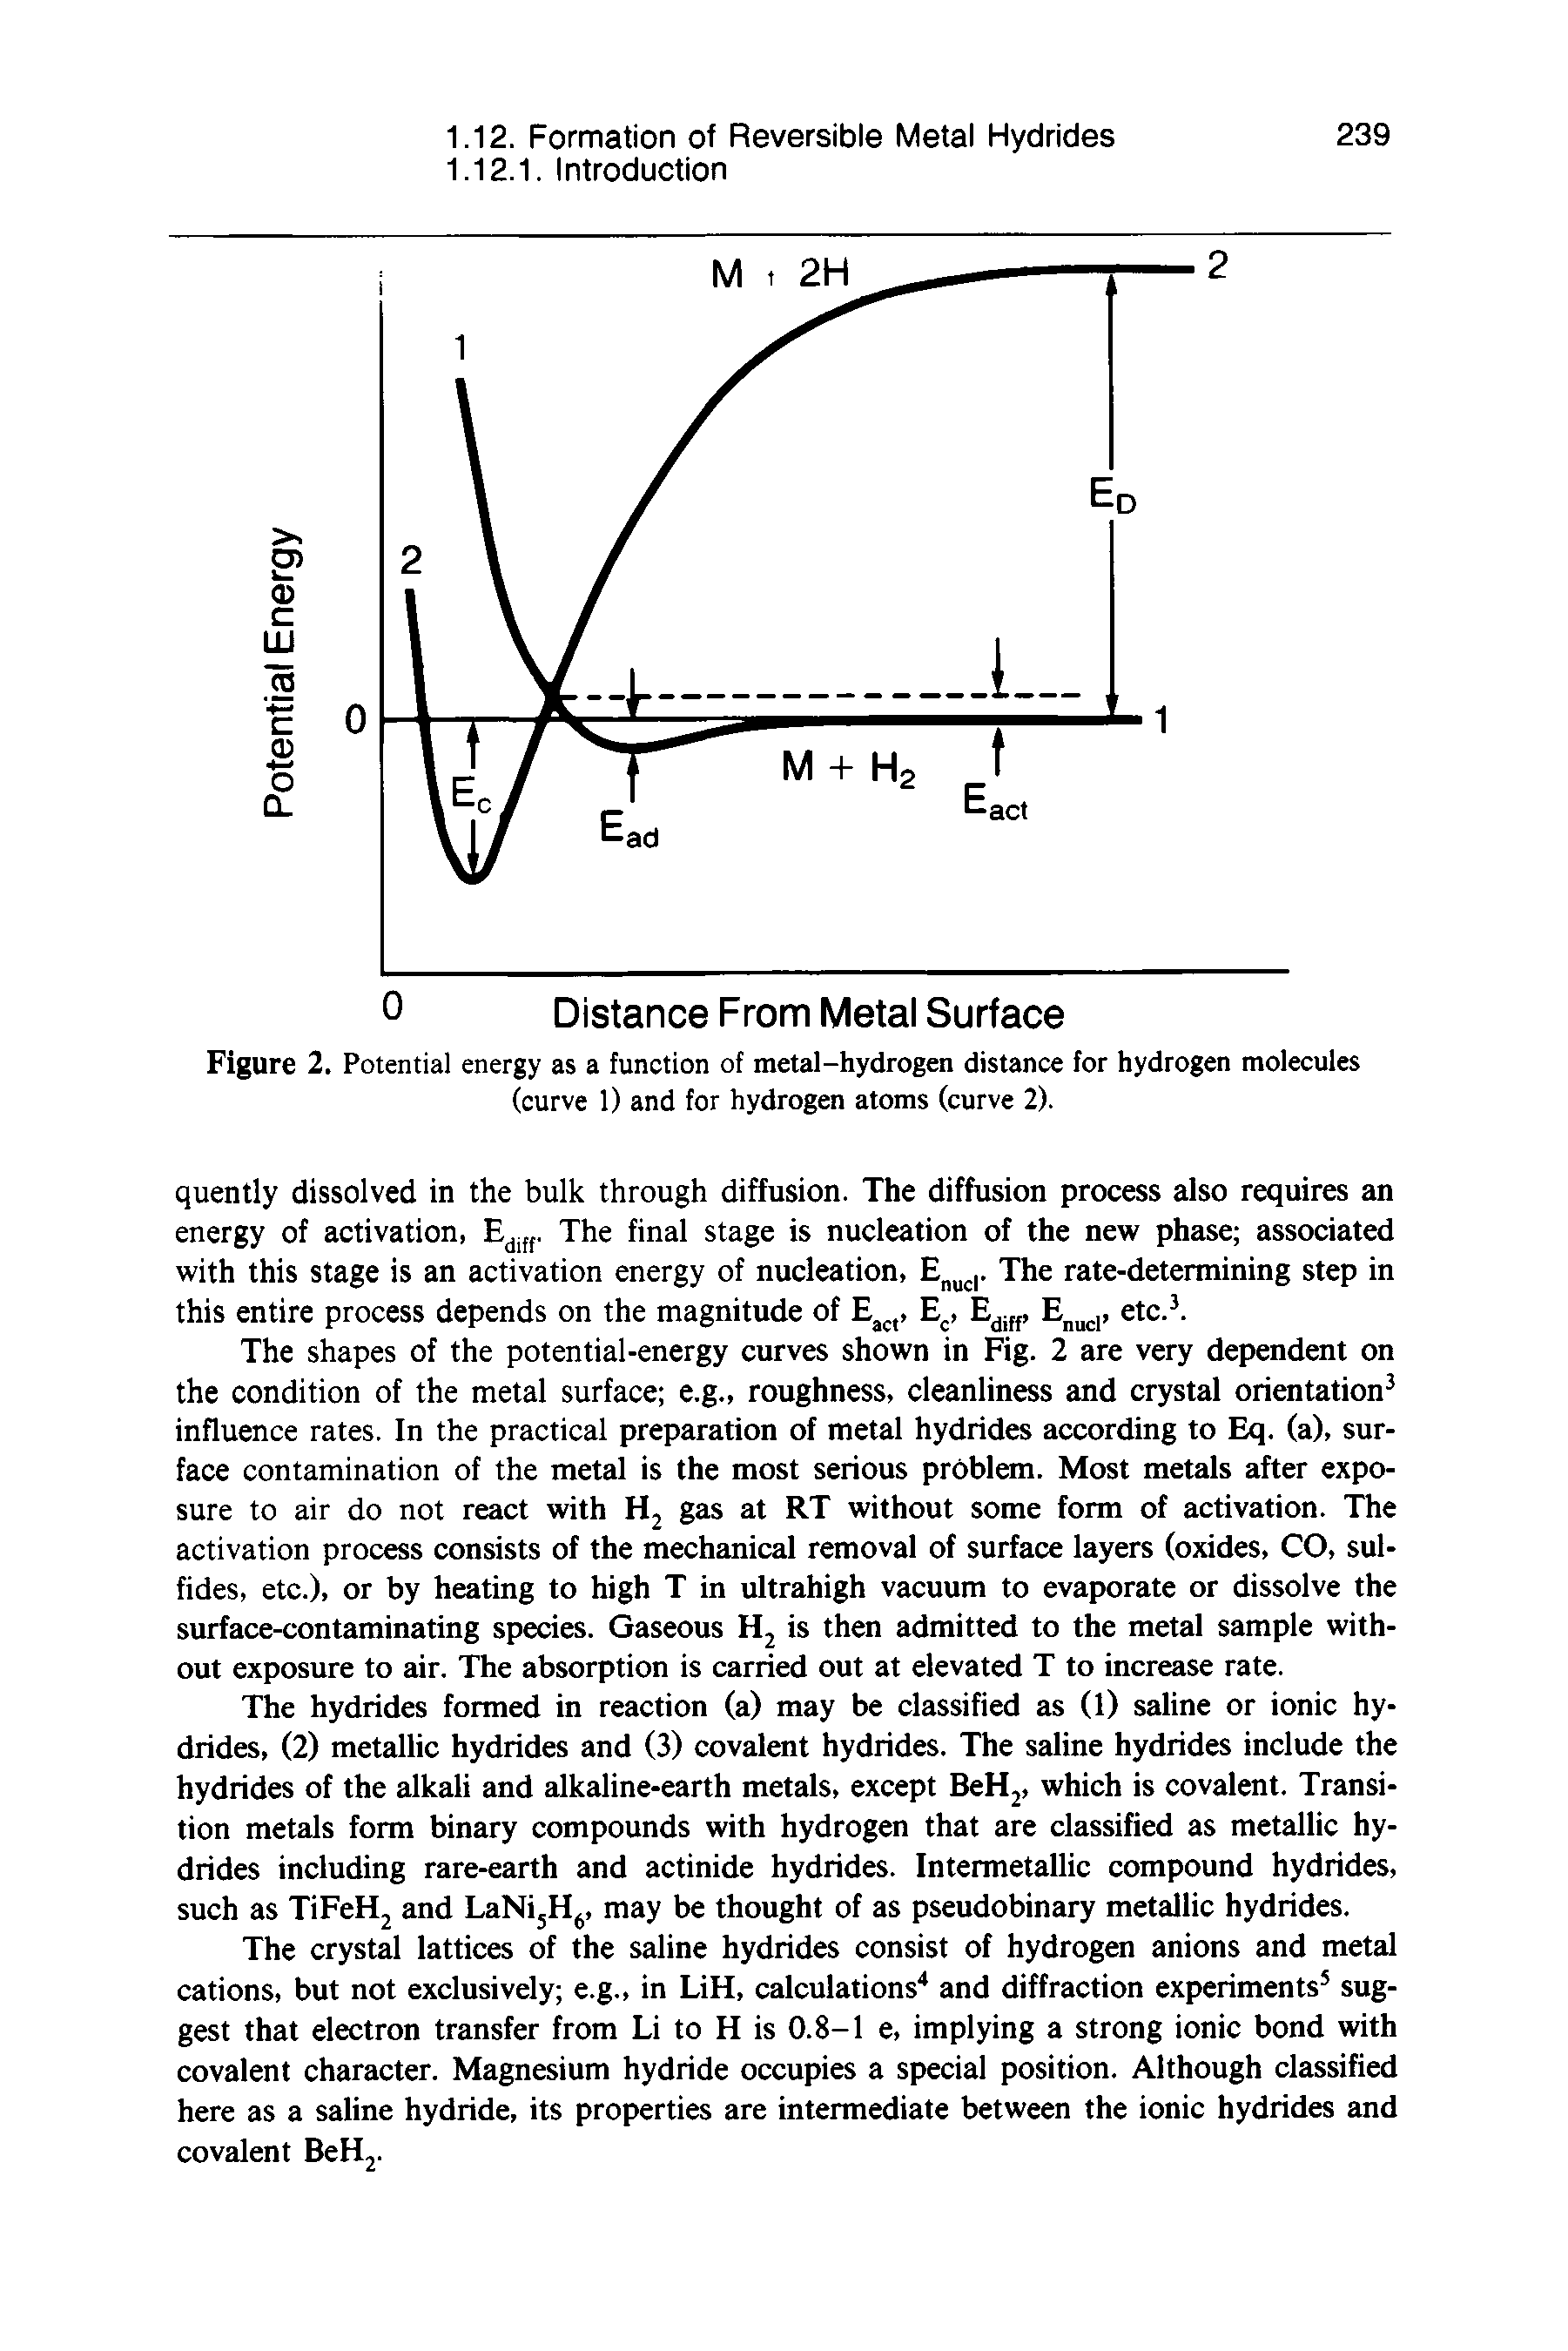 Figure 2. Potential energy as a function of metal-hydrogen distance for hydrogen molecules (curve 1) and for hydrogen atoms (curve 2).